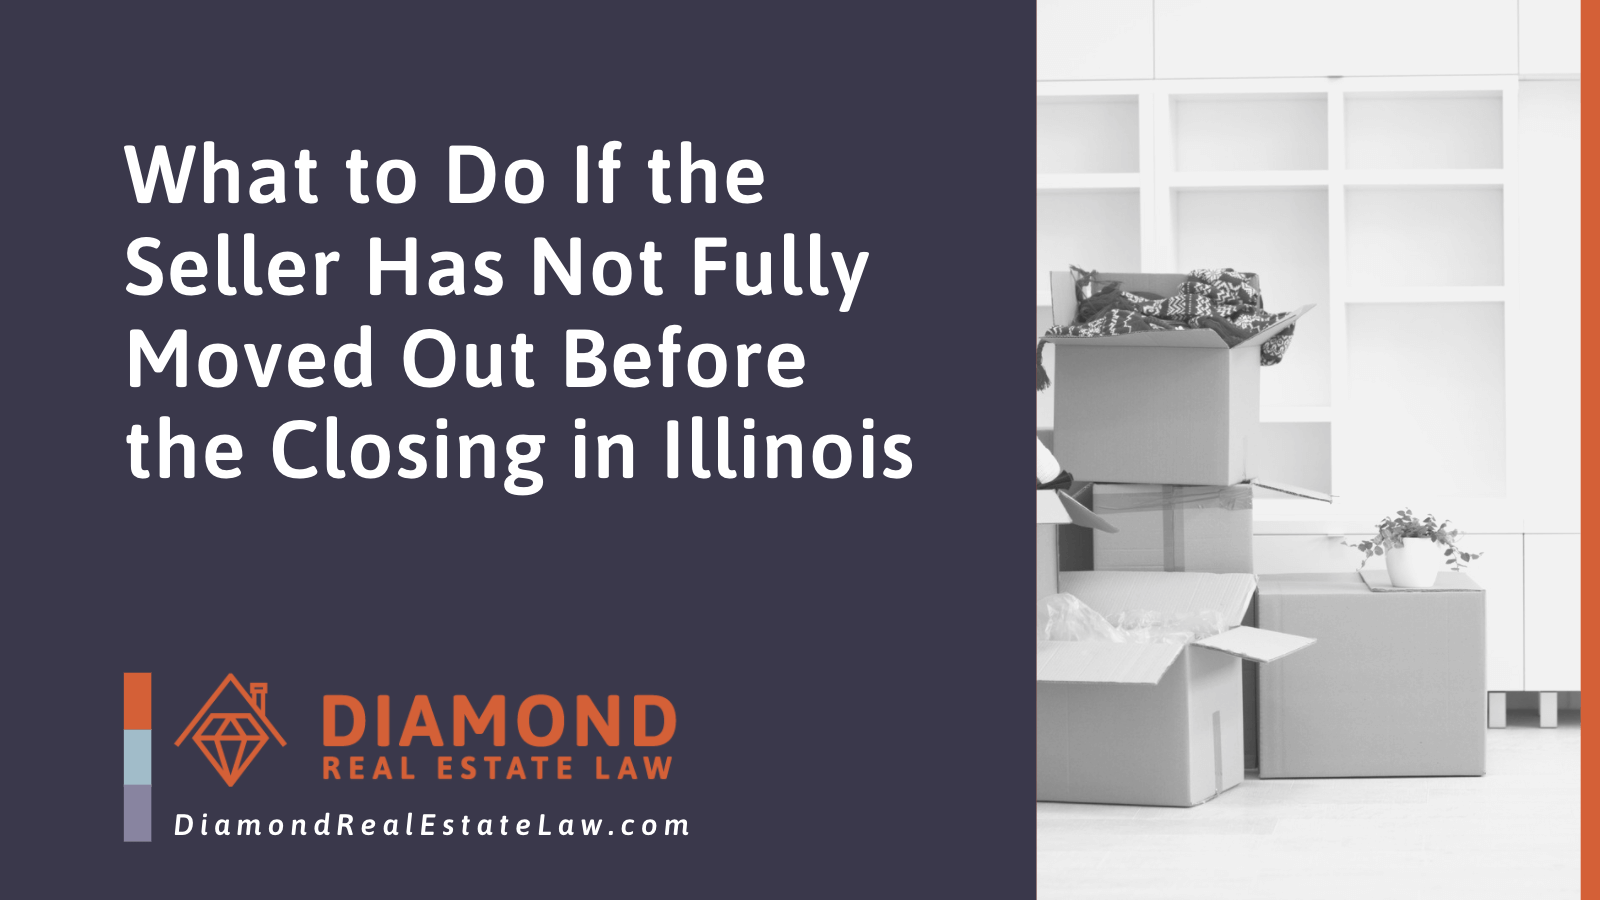 What to Do If the Seller Has Not Fully Moved Out Before the Closing in Illinois - Diamond Real Estate Law | McHenry, IL Residential Real Estate Lawyer